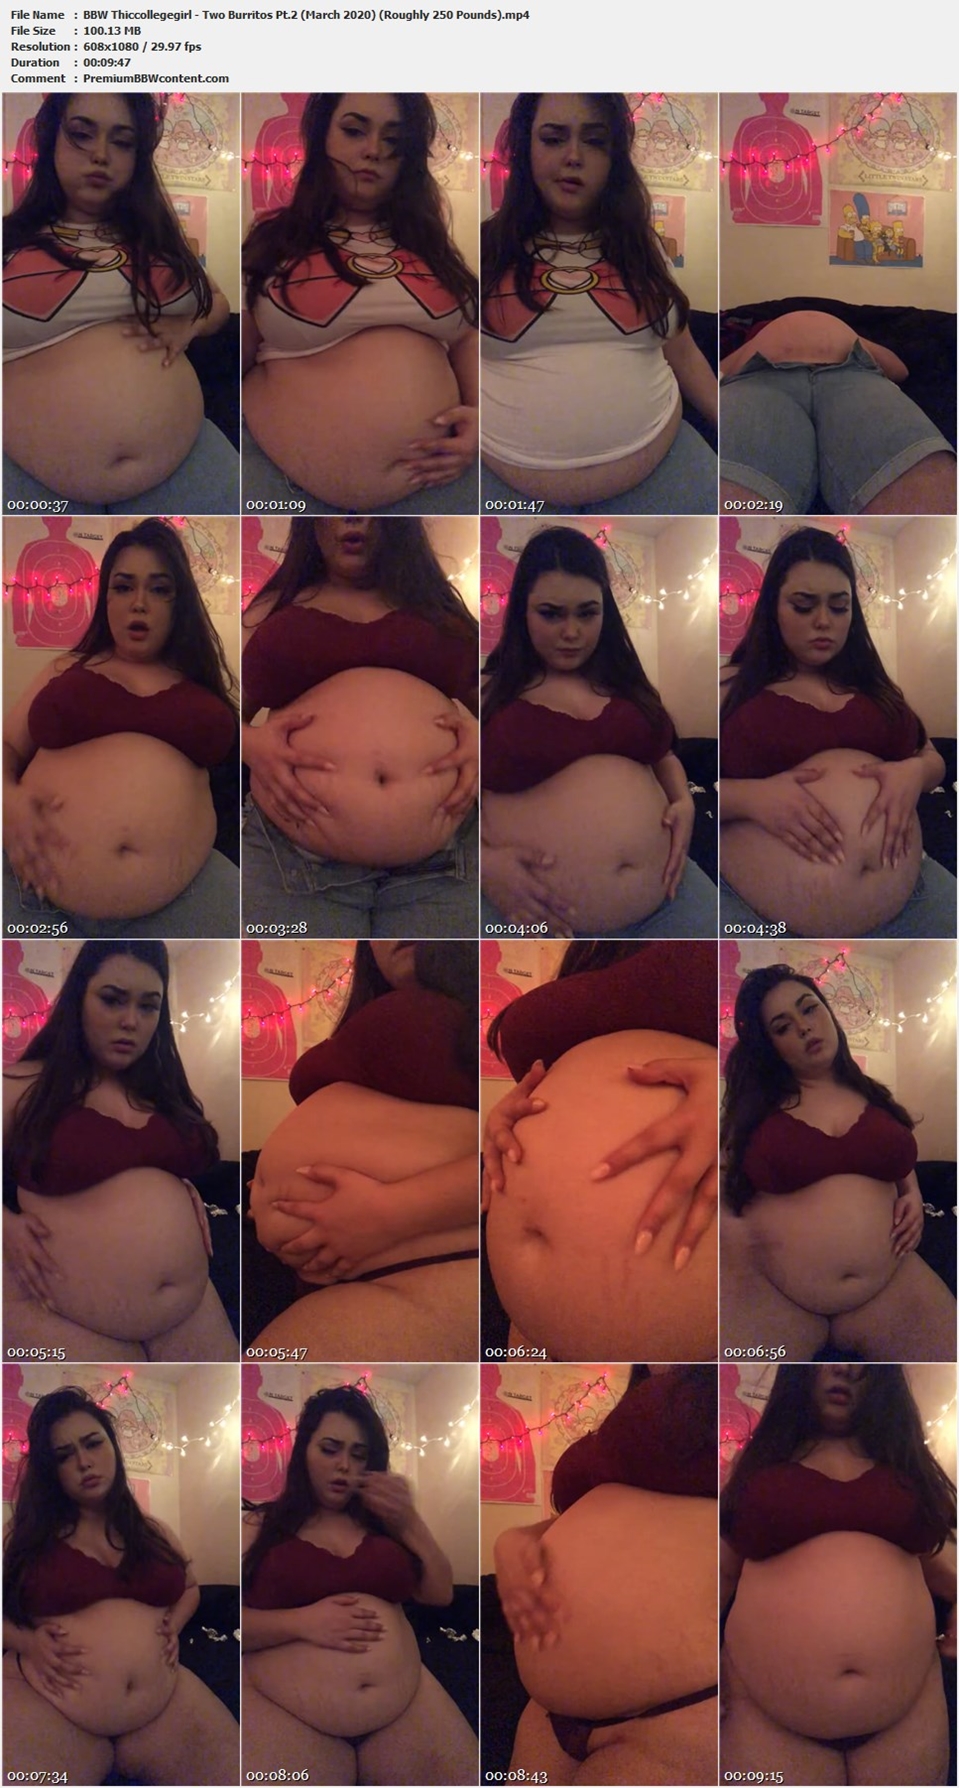 BBW Thiccollegegirl - Two Burritos Pt.2 (March 2020) (Roughly 250 Pounds) thumbnails